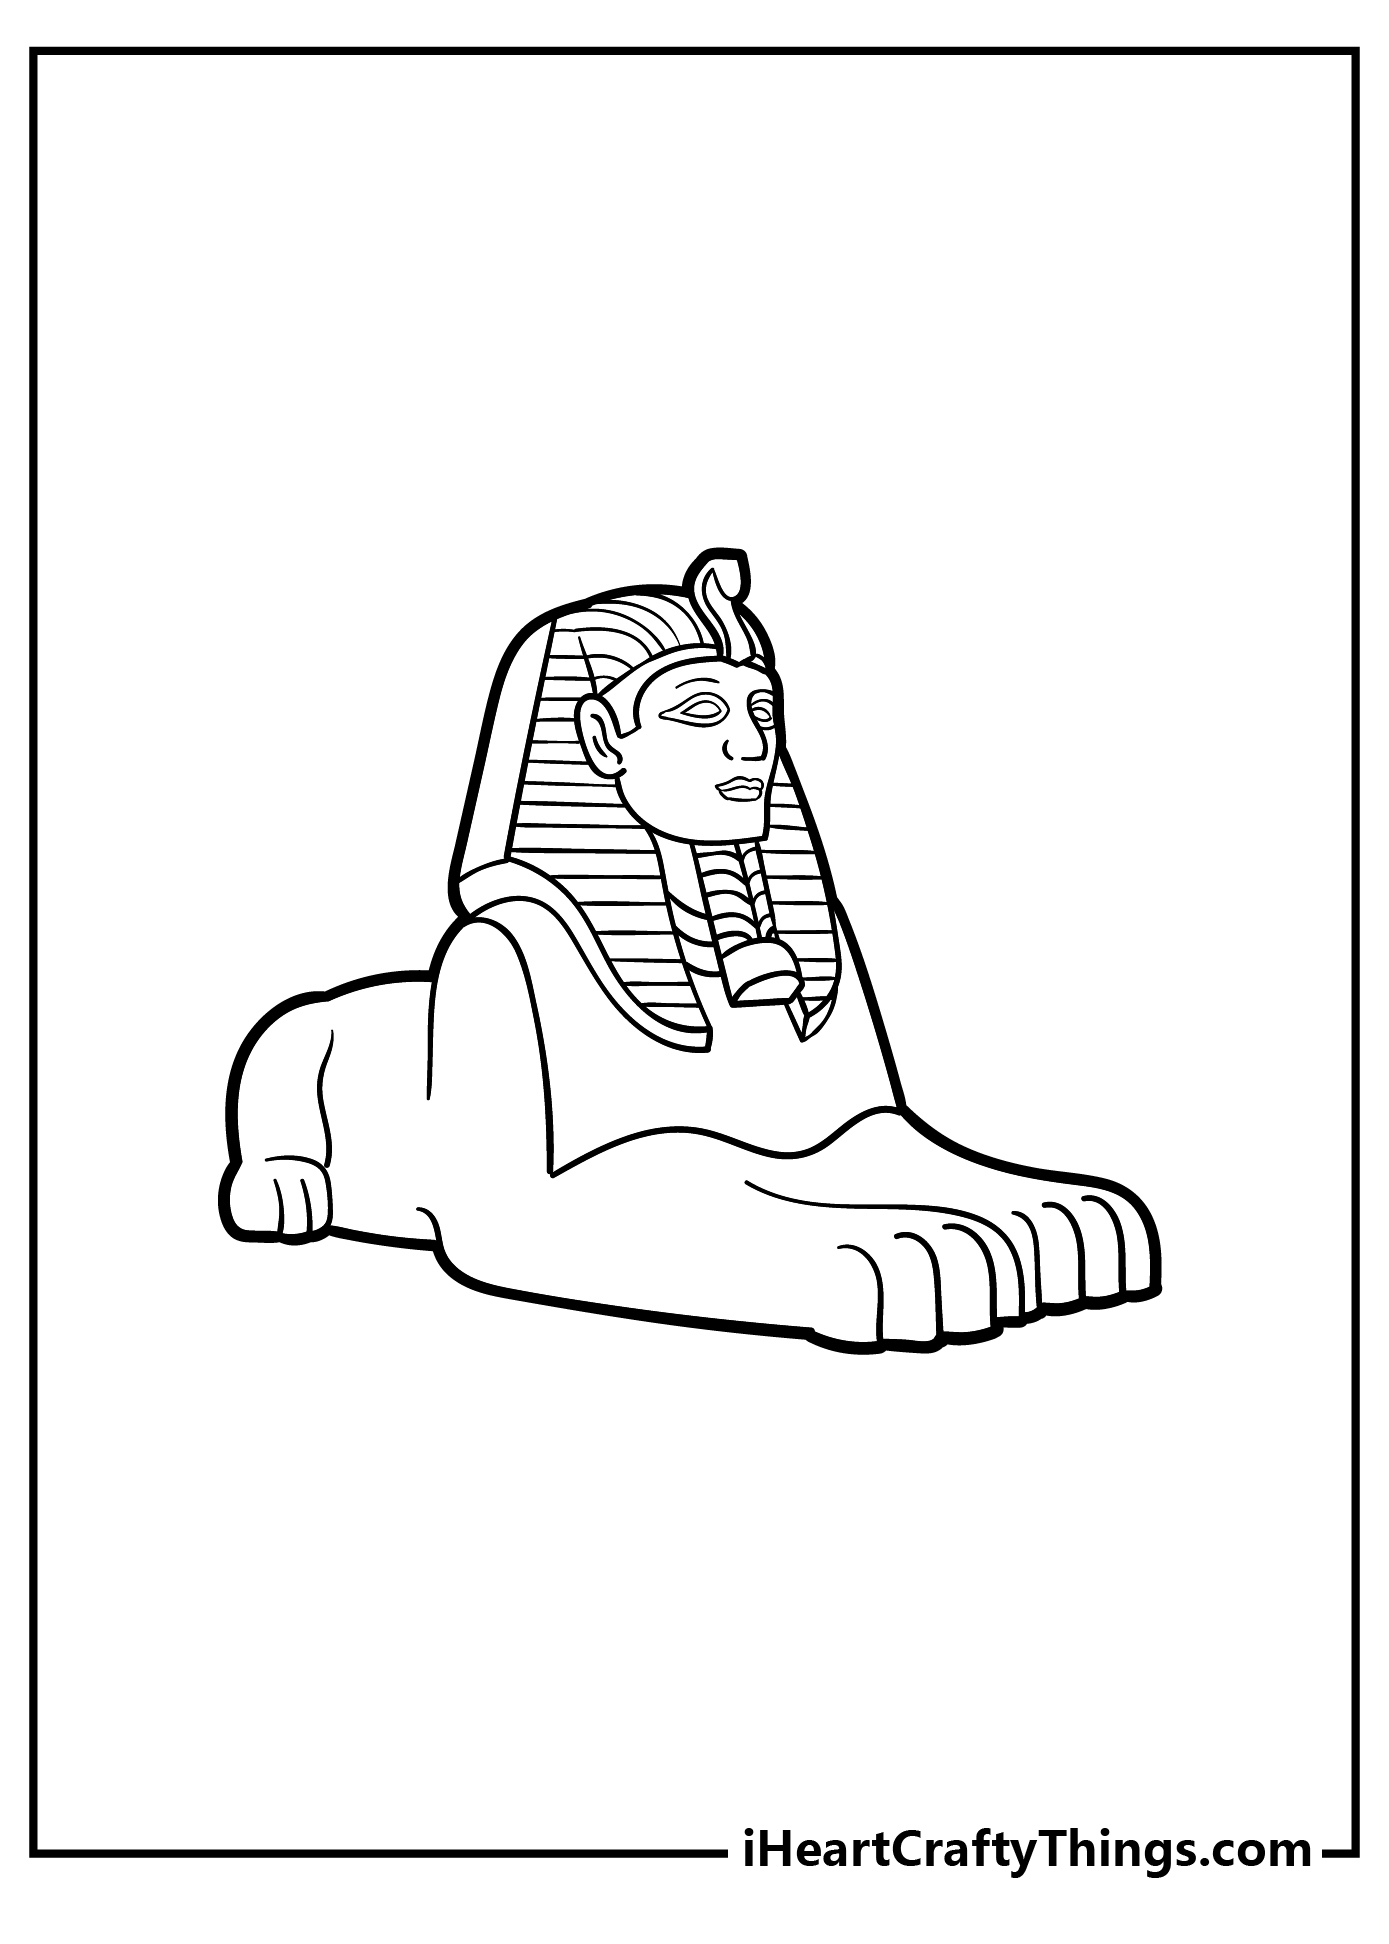 Egyptian Coloring Pages free pdf download